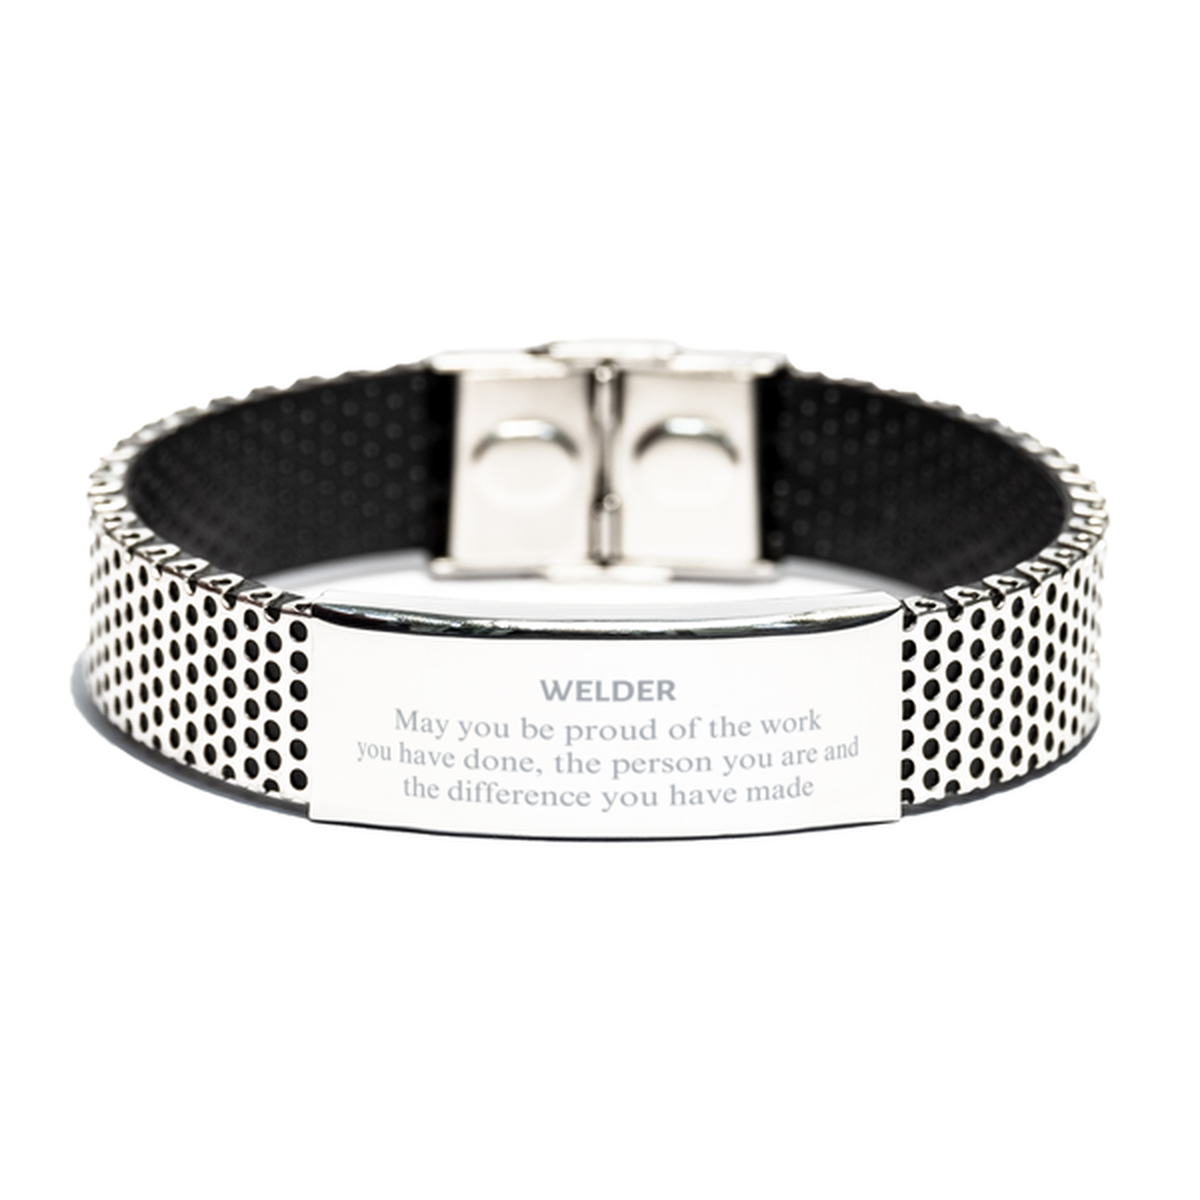 Welder May you be proud of the work you have done, Retirement Welder Stainless Steel Bracelet for Colleague Appreciation Gifts Amazing for Welder